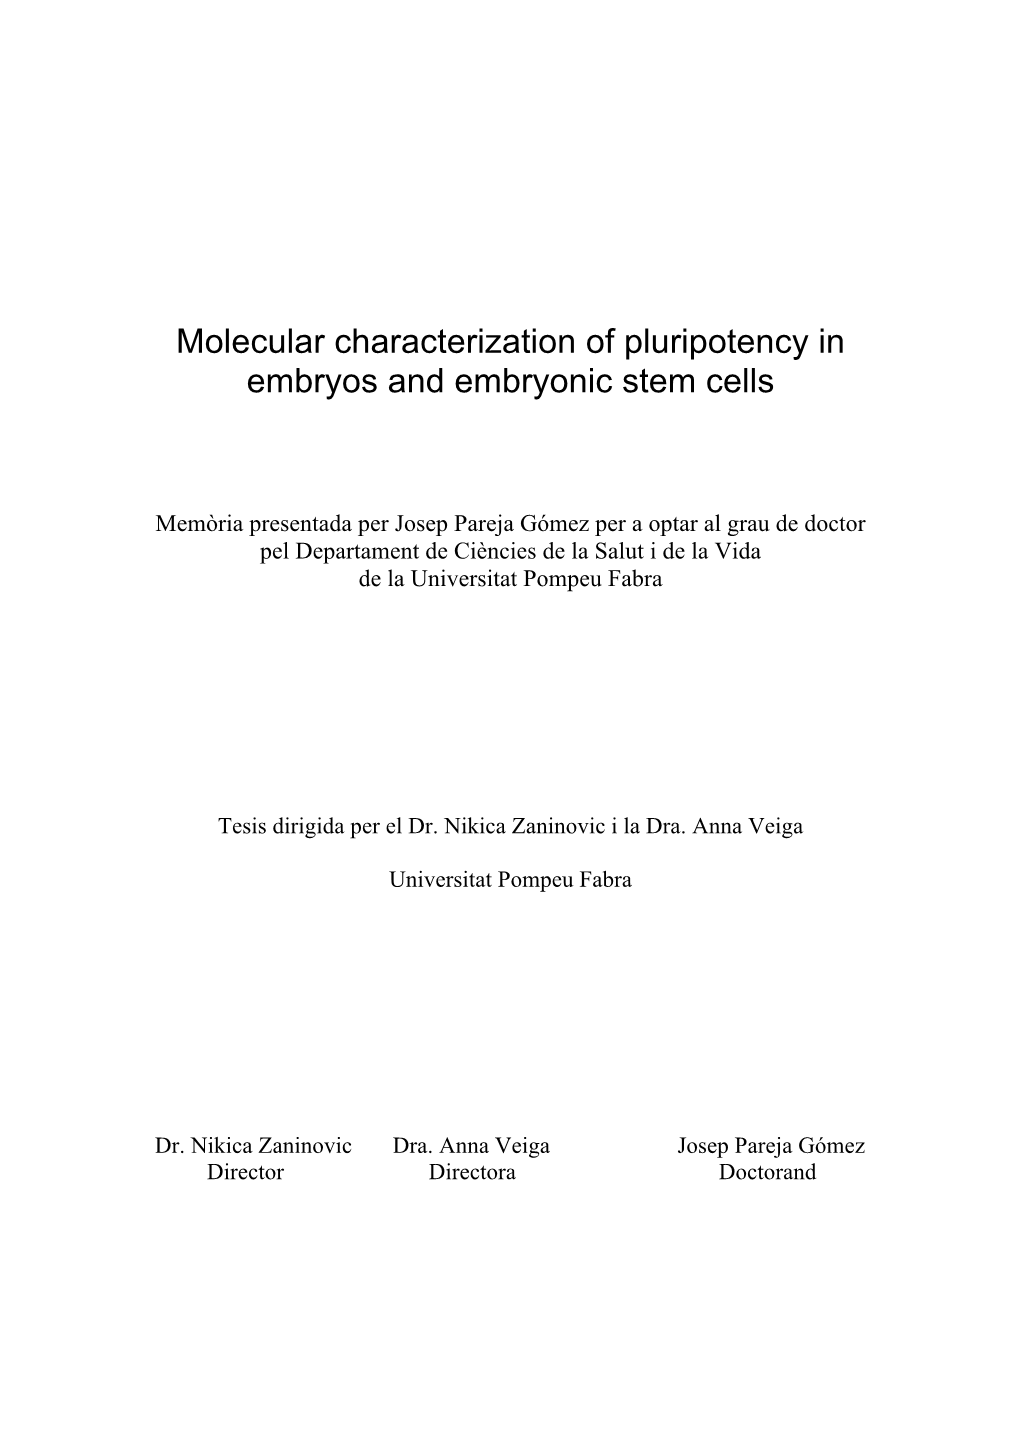 Molecular Characterization of Pluripotency in Embryos and Embryonic Stem Cells